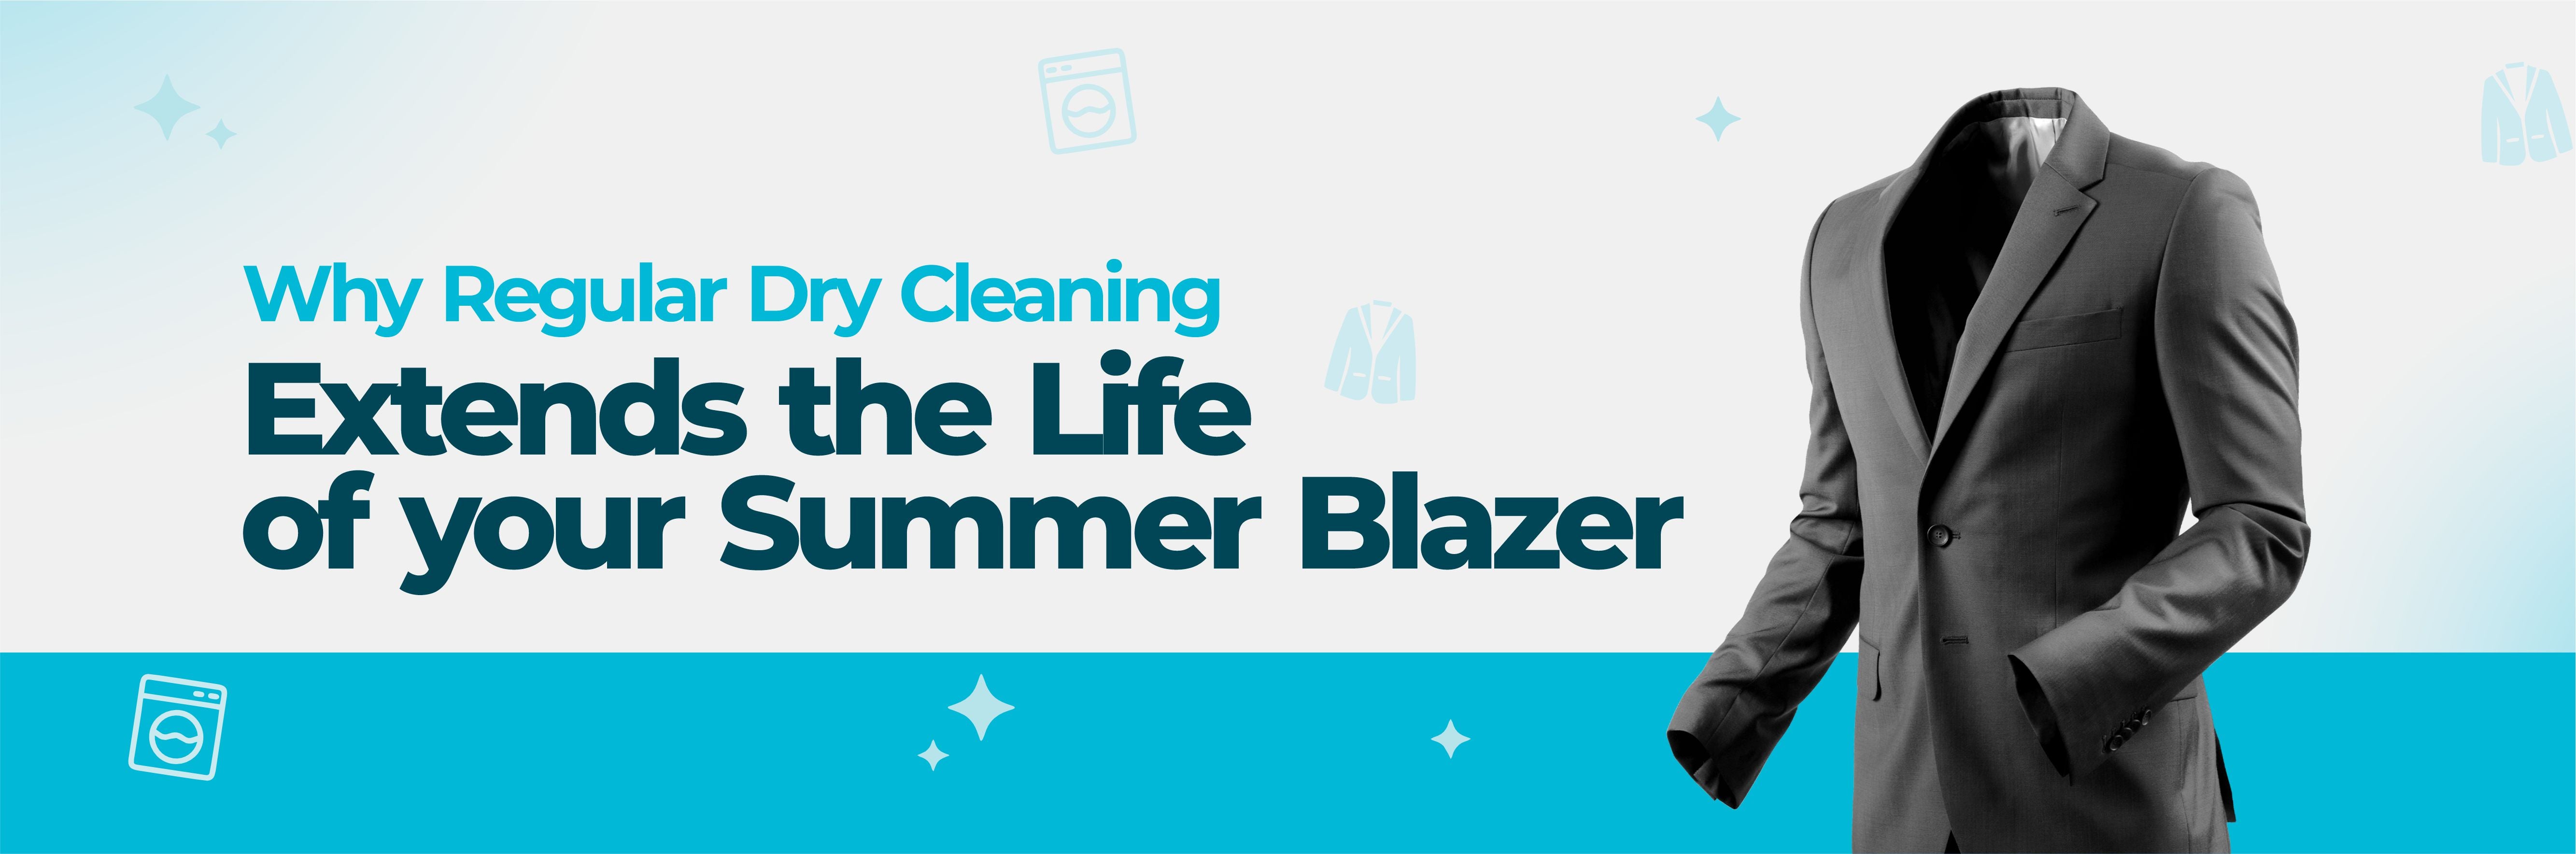 Why Regular Dry Cleaning Extends the Life of Your Summer Blazer